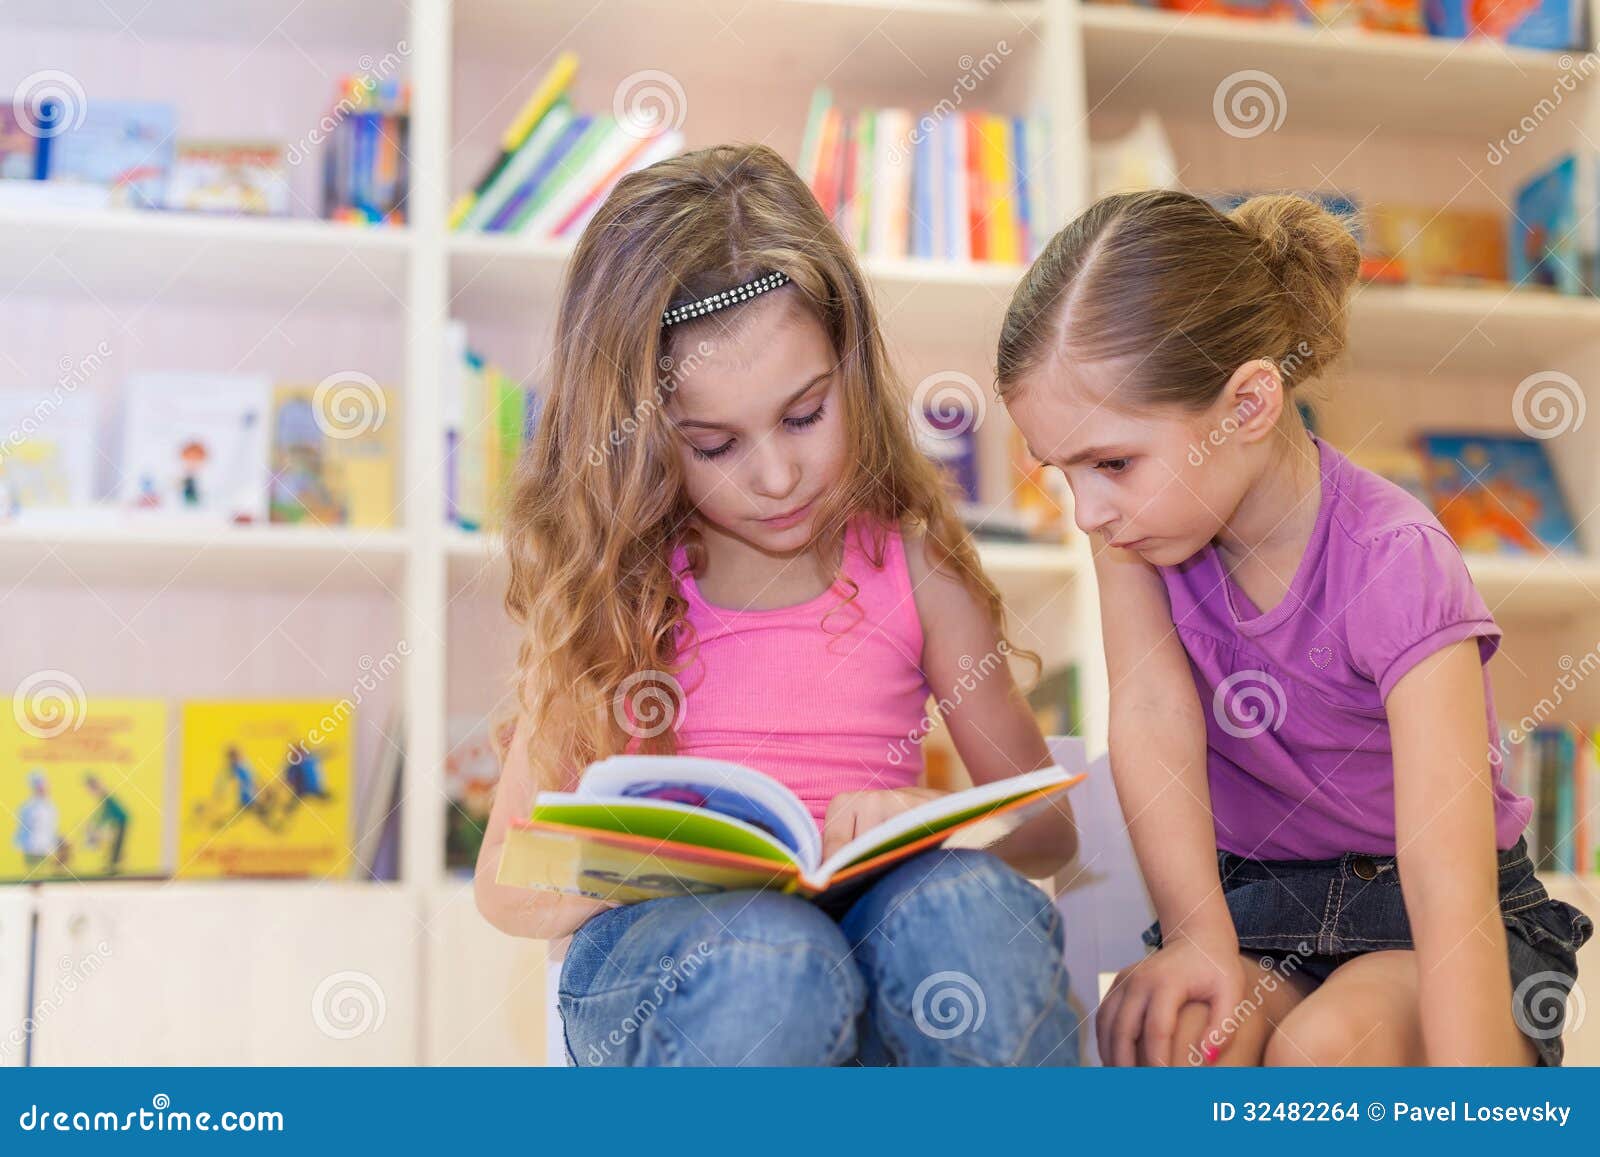 two girls are reading an interesting book